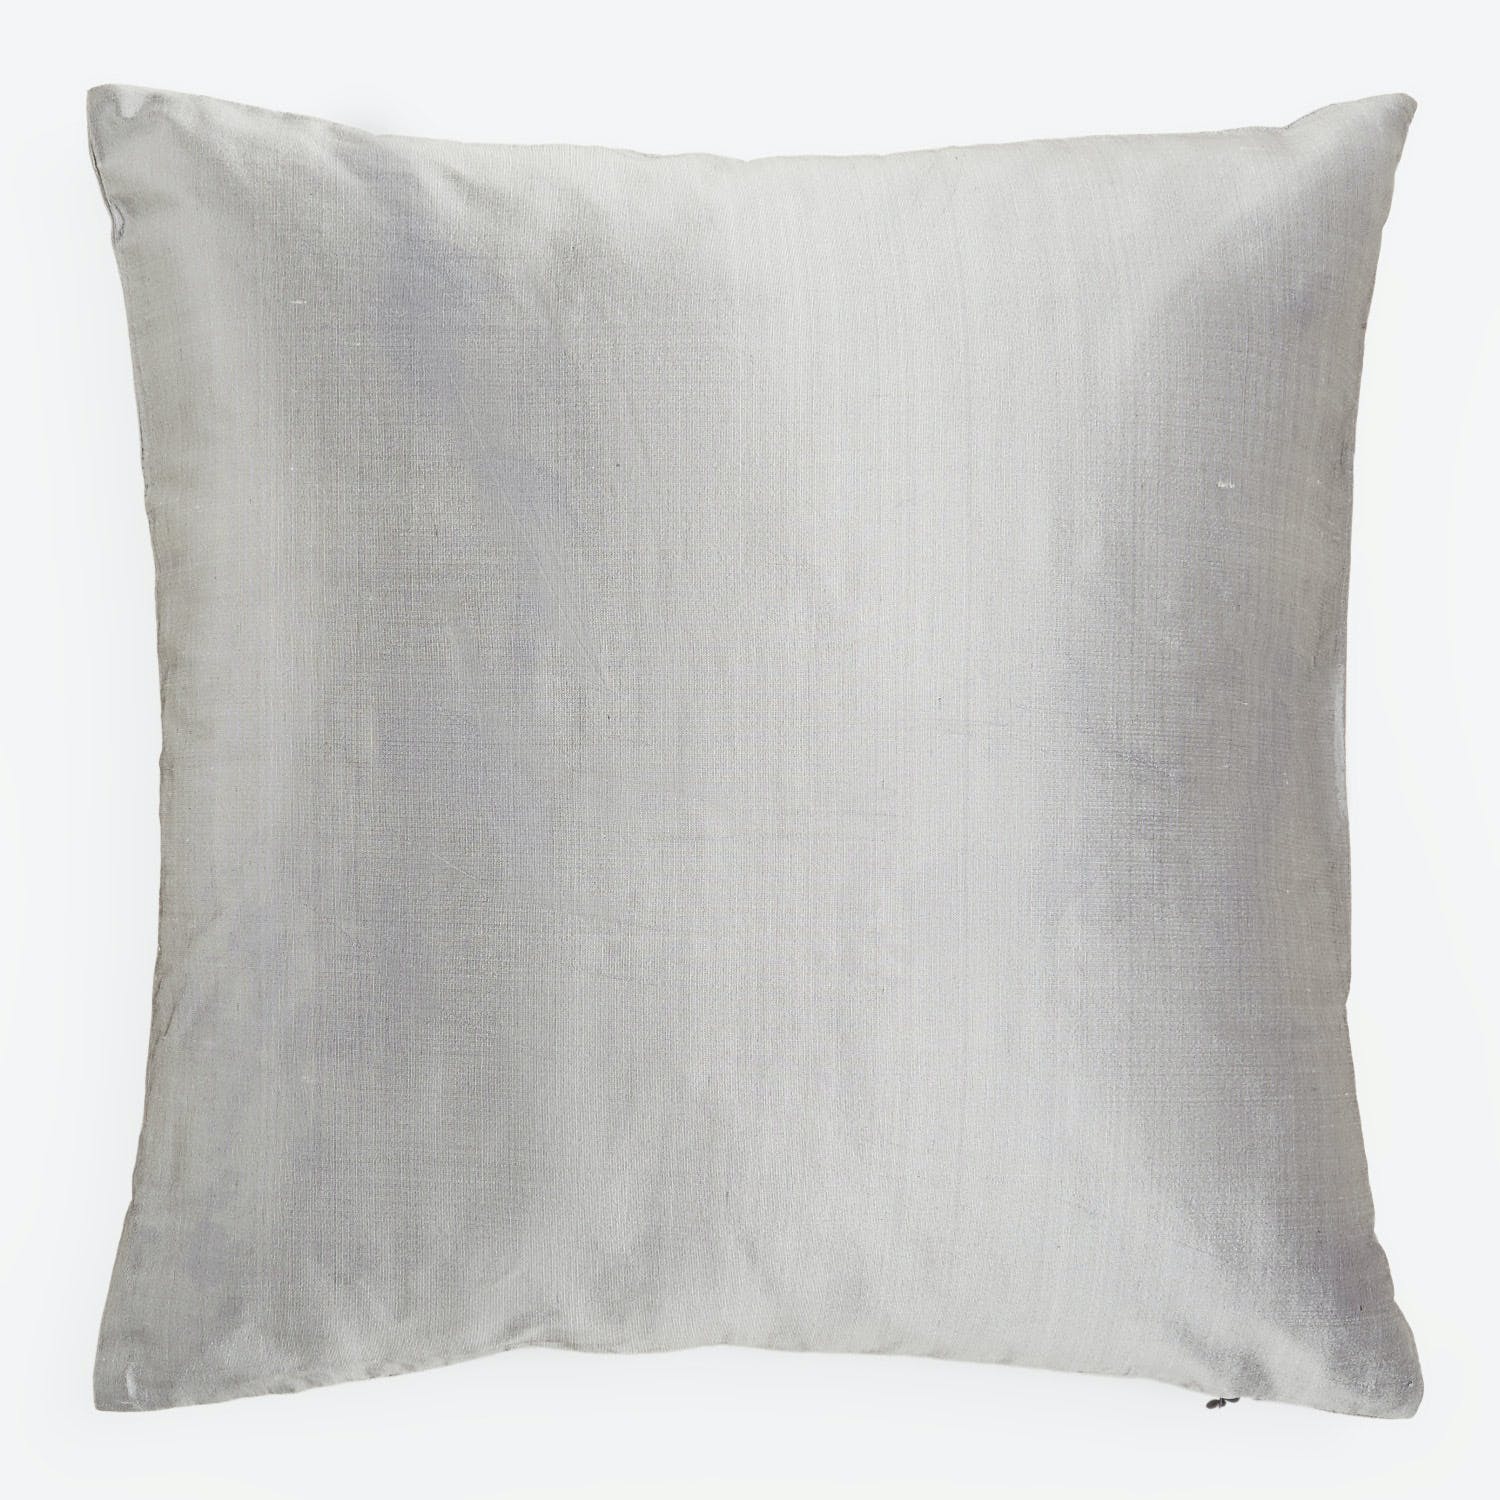 Plain silver square pillow with removable cover, slight mottled texture.